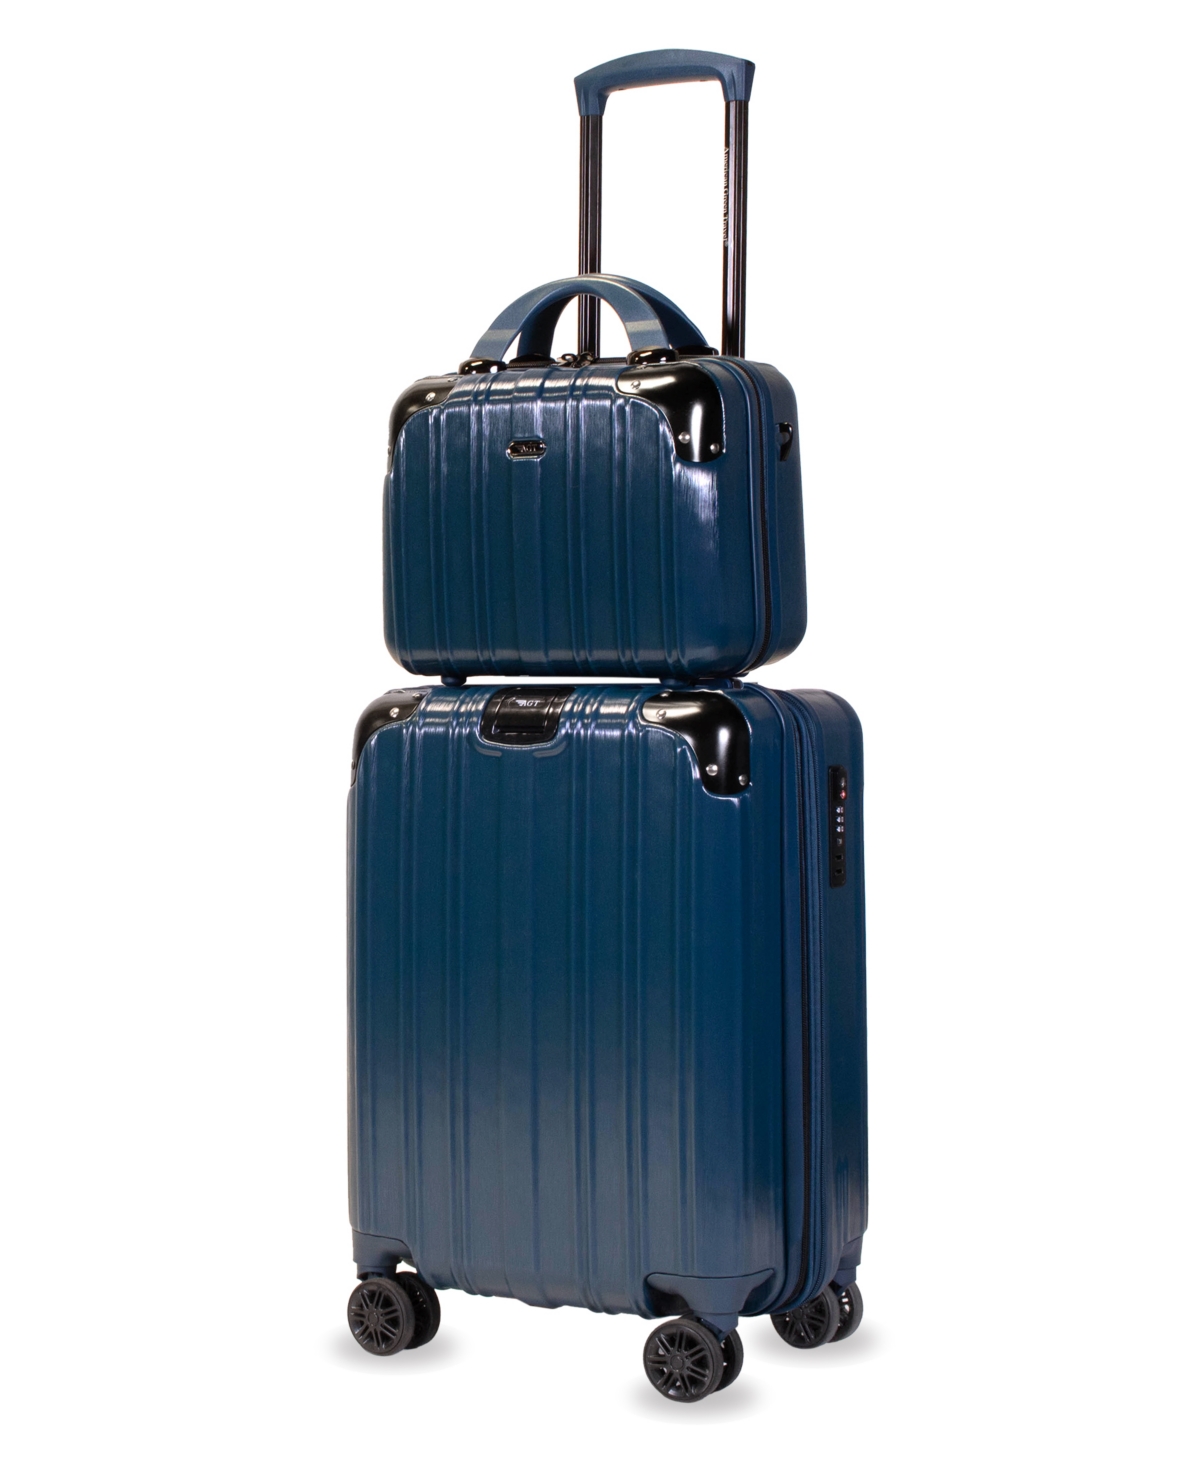 Melrose S Carry-on Vanity Luggage, Set of 2 - Navy